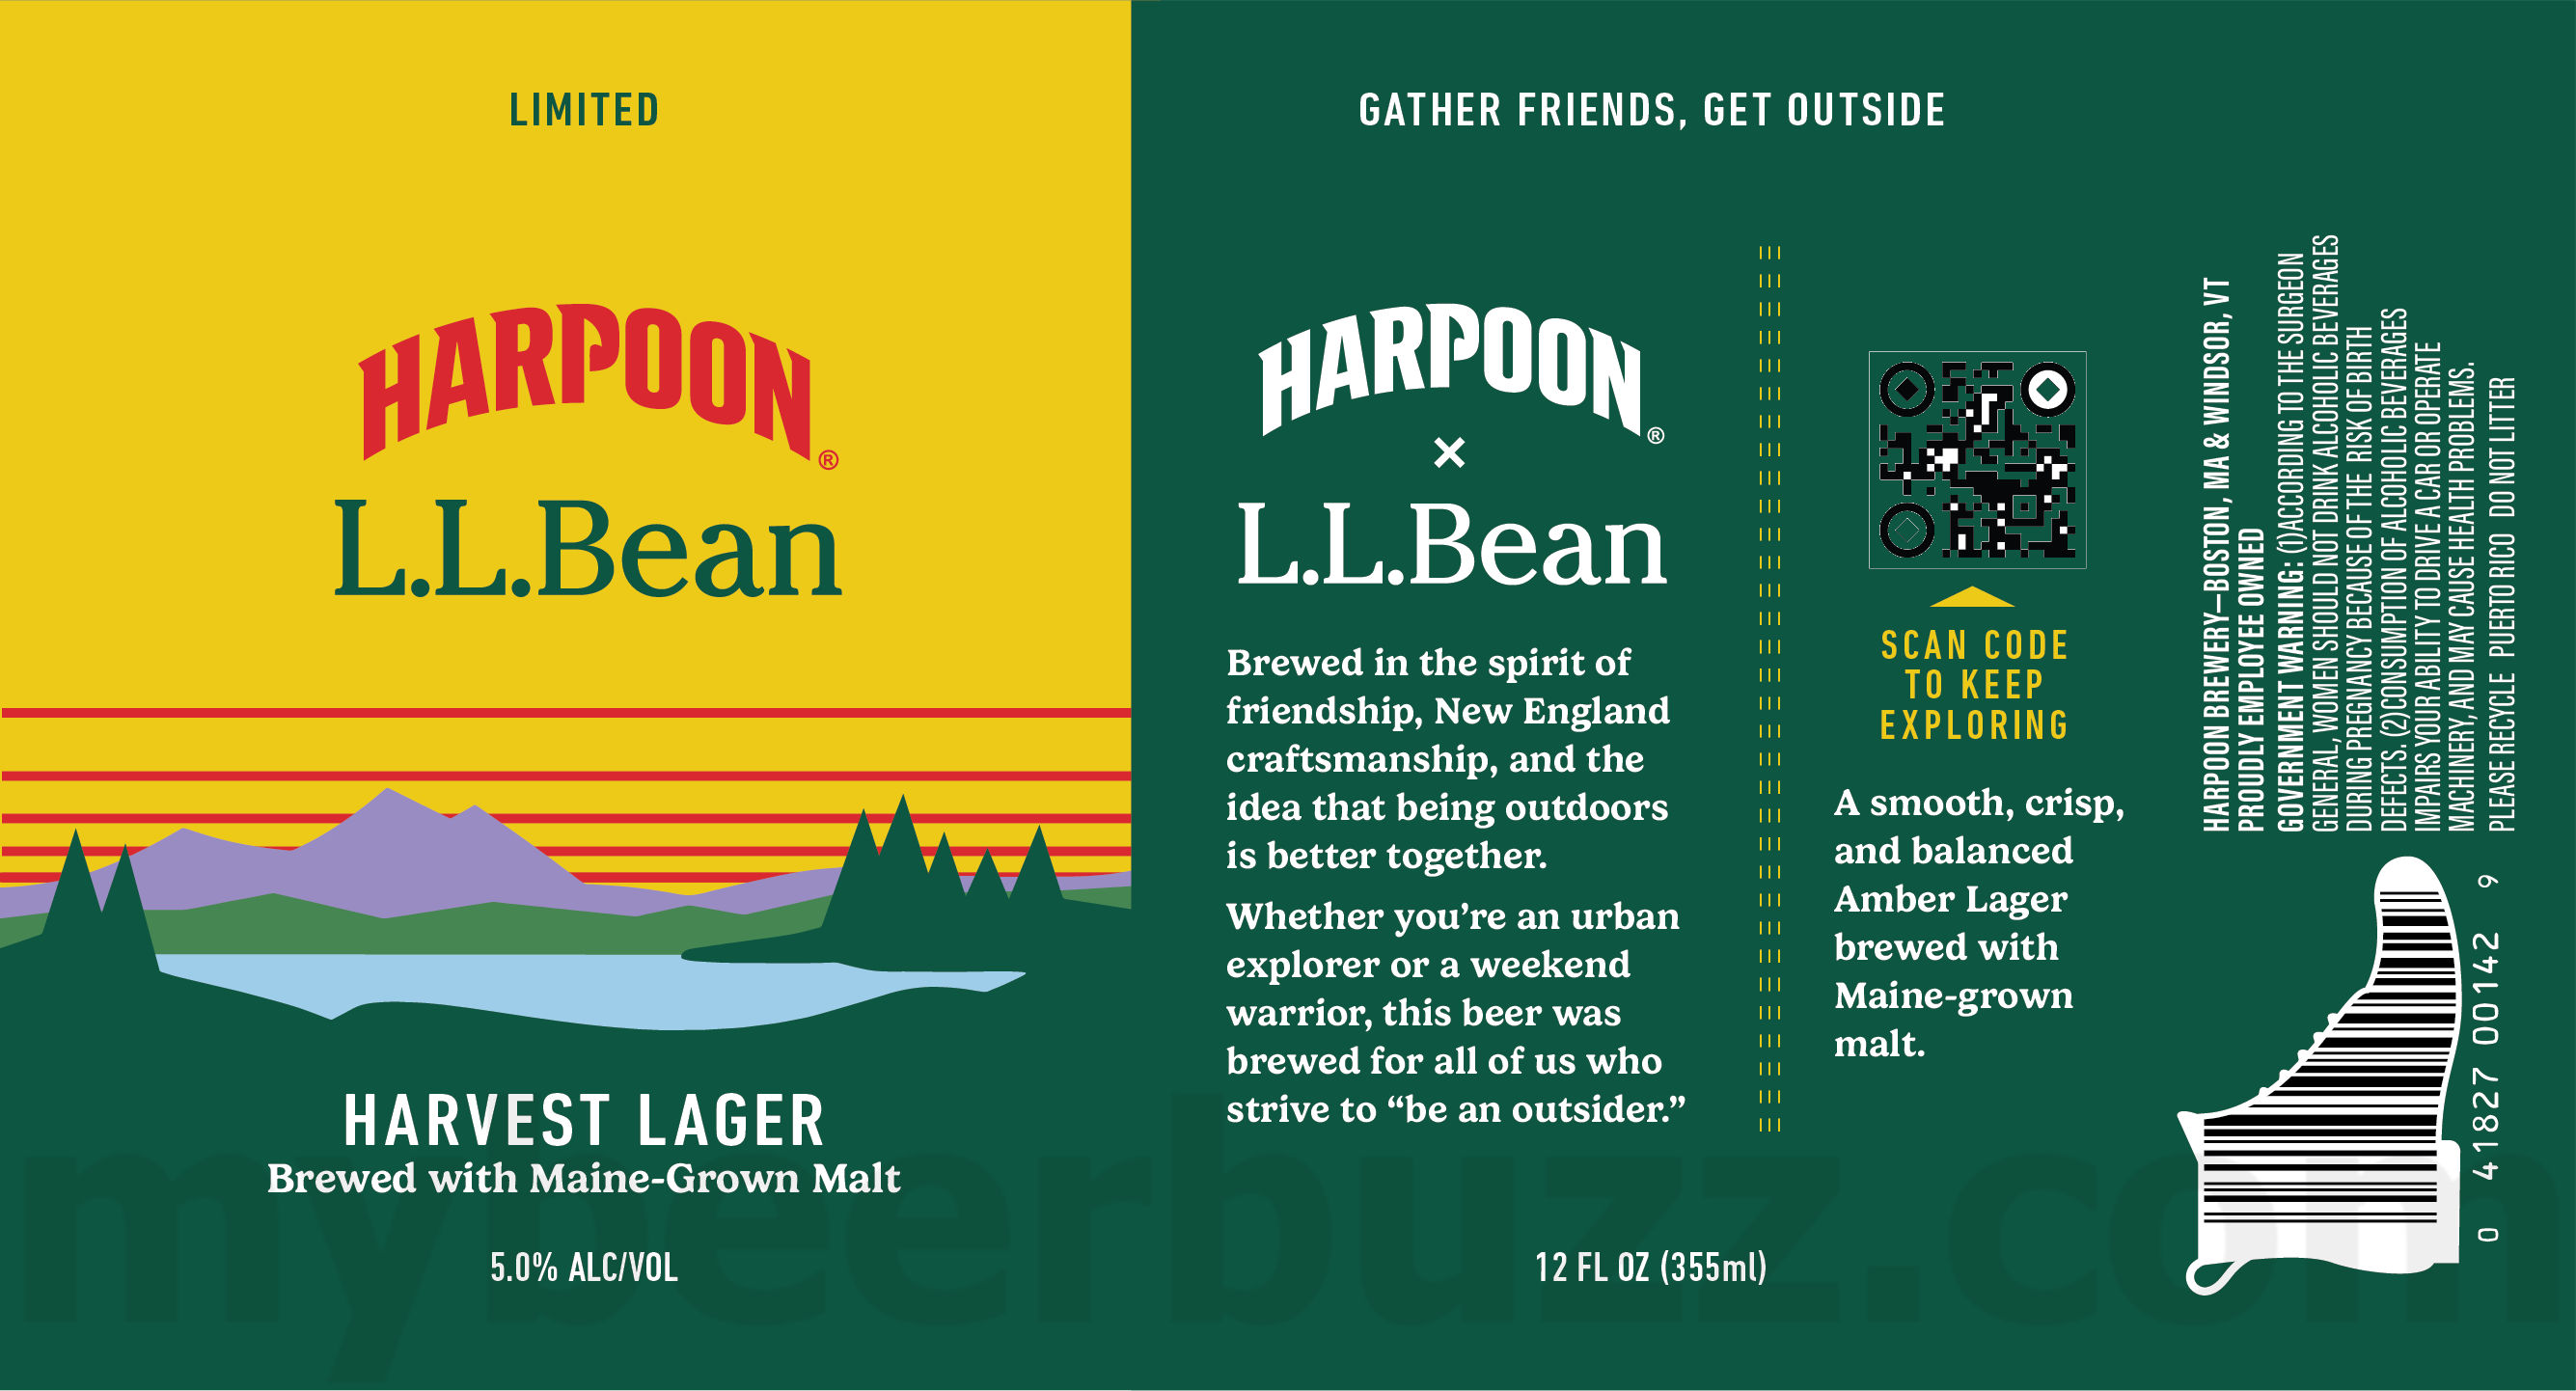 Harpoon & L.L. Bean Team Up For Harvest Lager